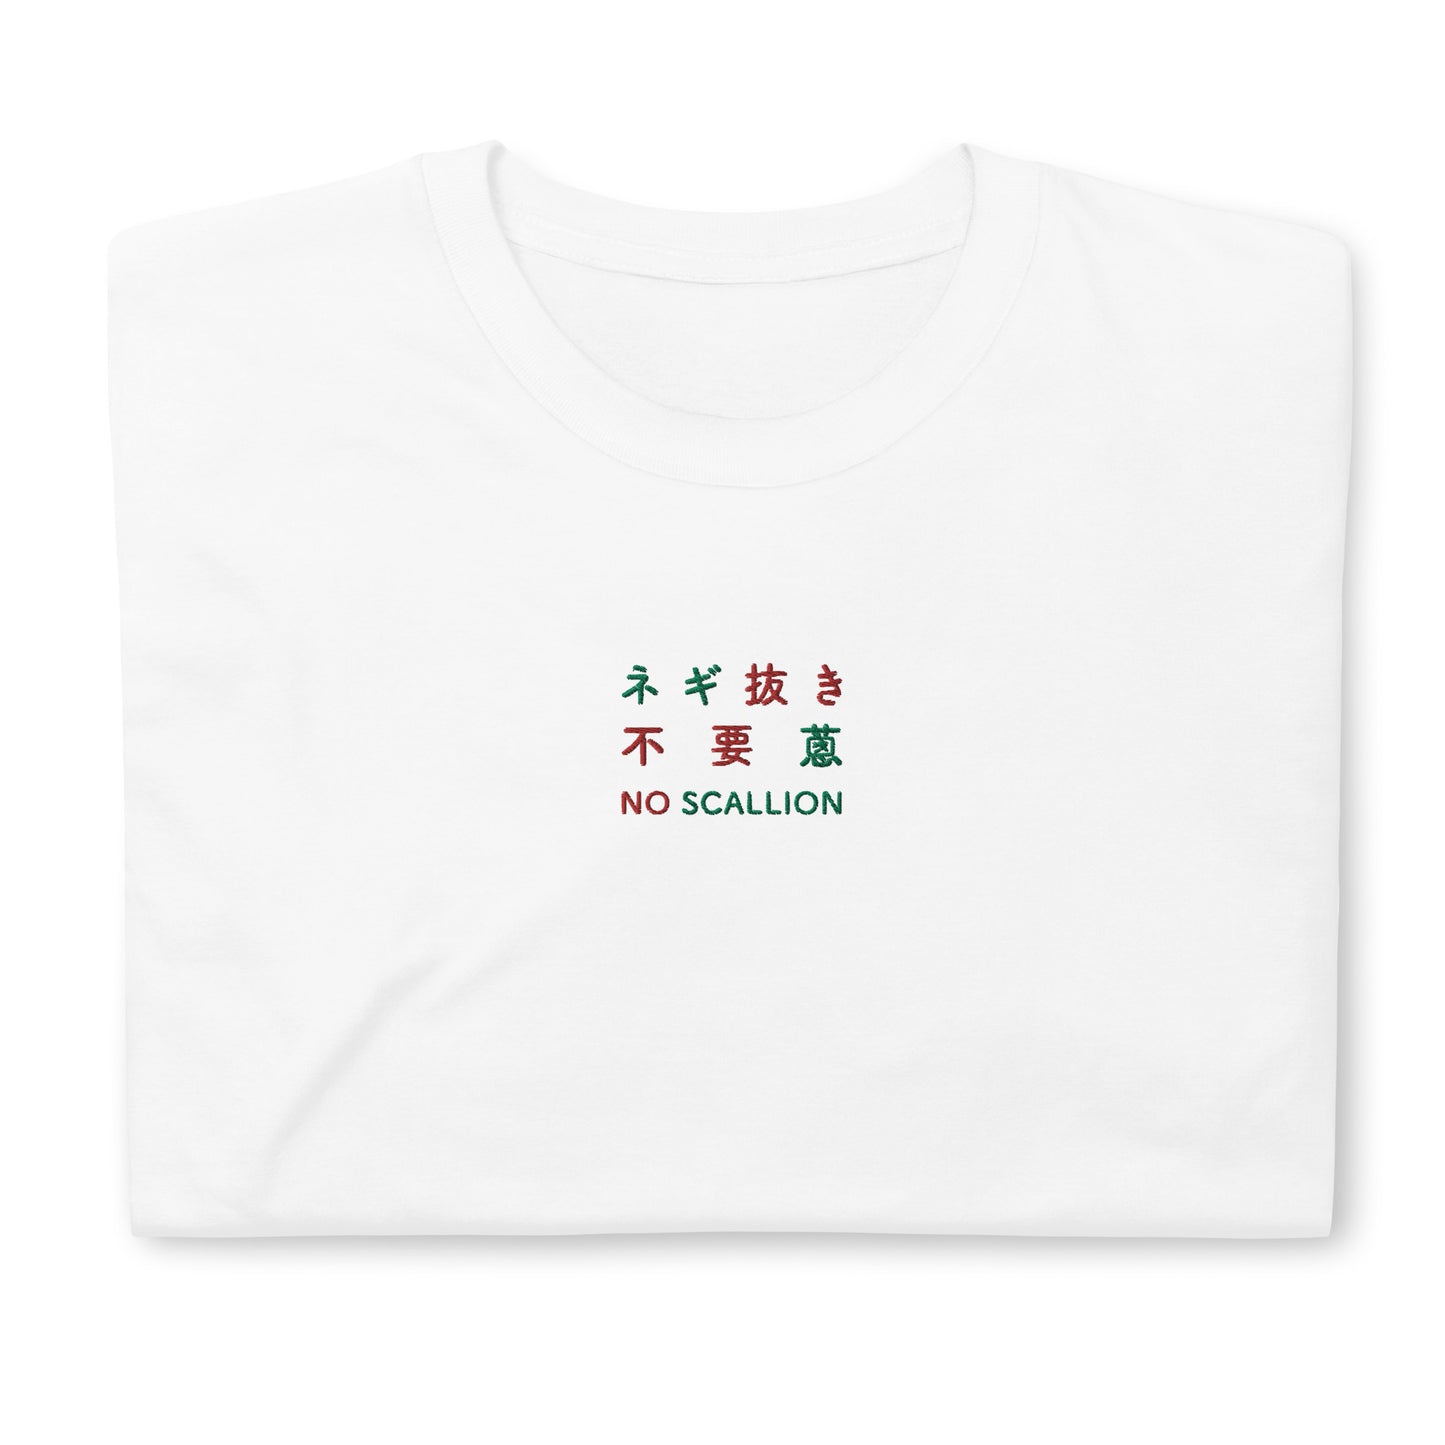 White High Quality Tee - Front Design with Red/Green Embroidery "NO SCALLIONit" in English, Japanese and Chinese